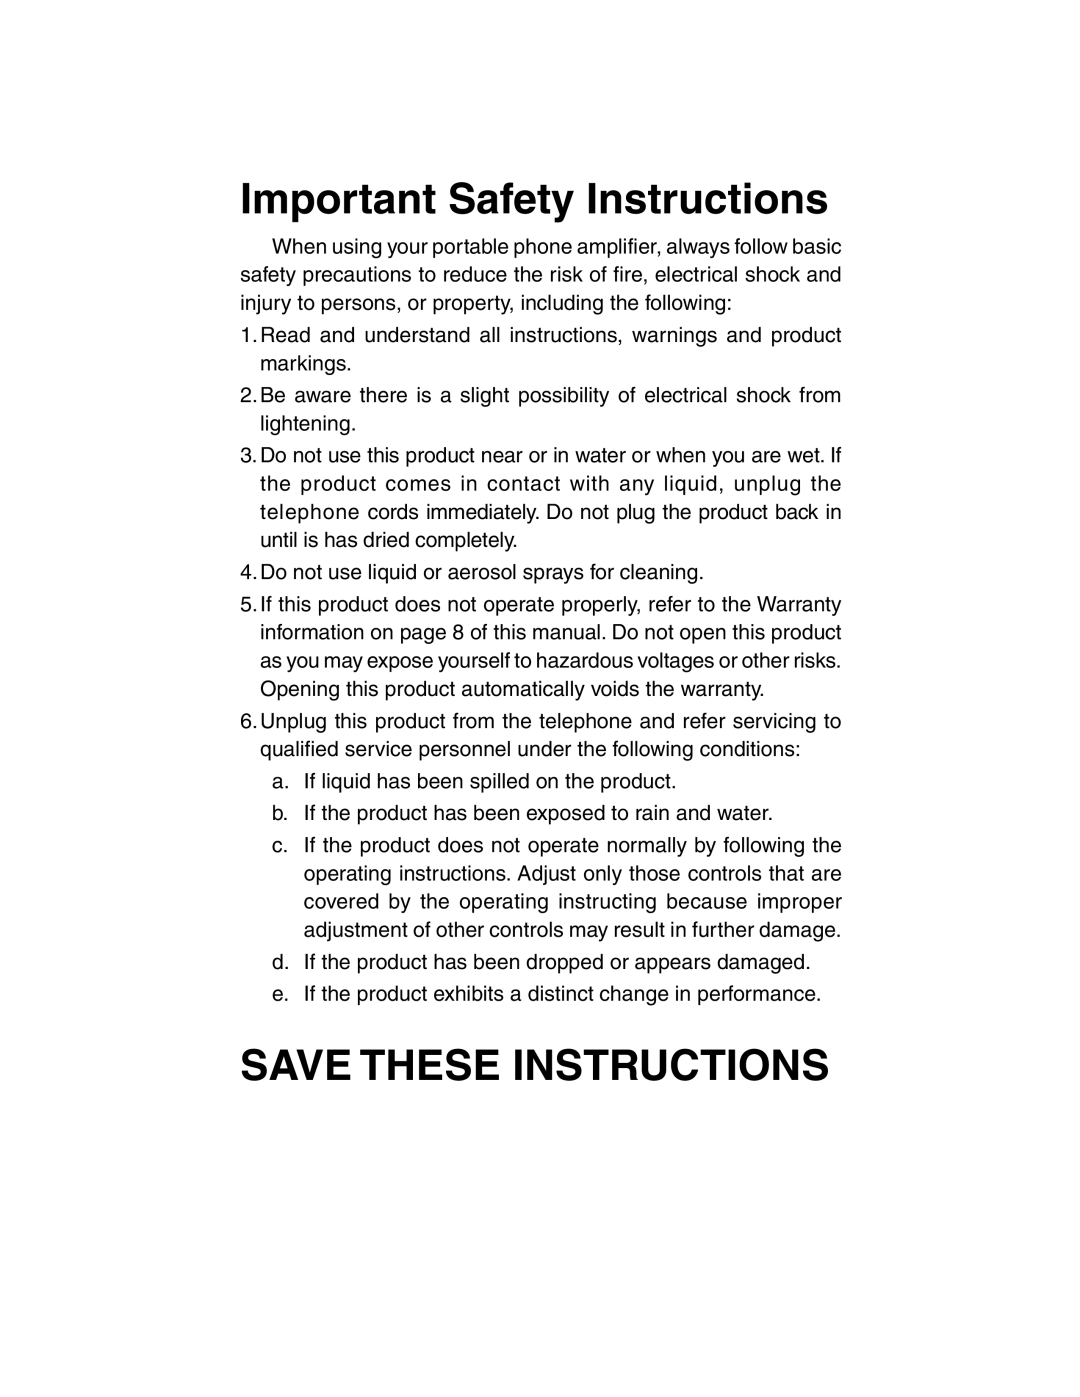 ClearSounds Portable Telephone Amplifier manual Save These Instructions 